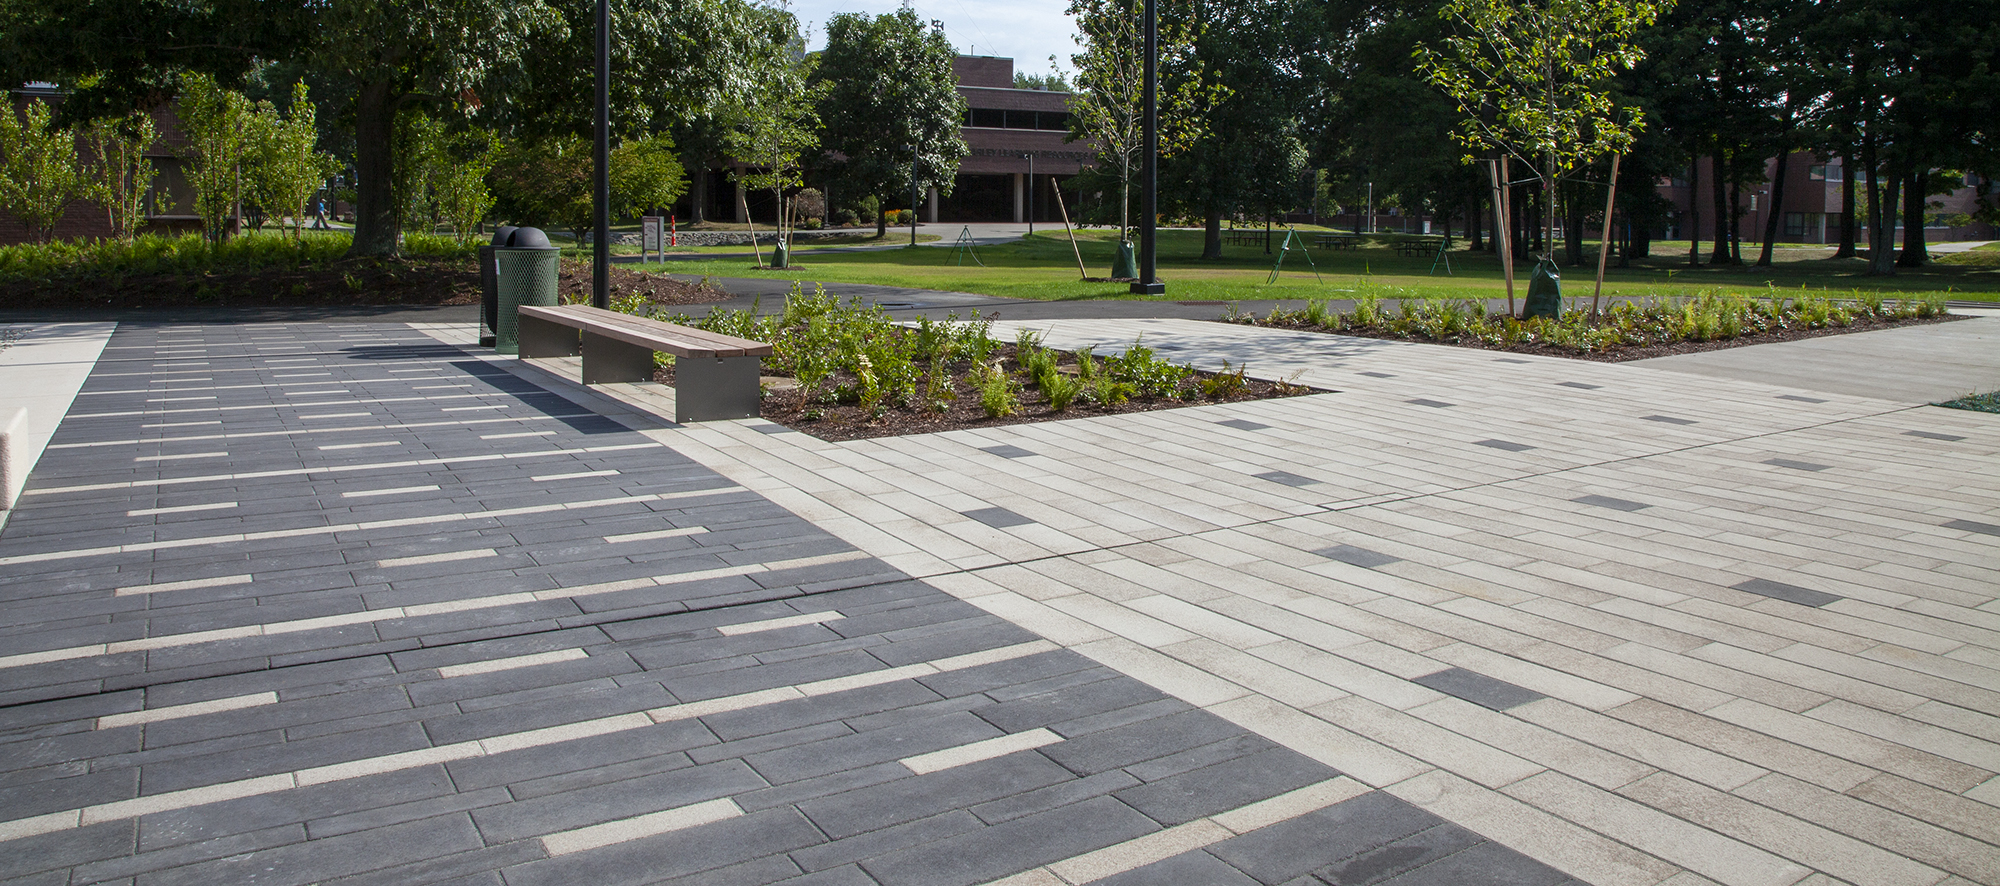 A greenspace in front of a building features a pedestrian plaza and paths made with Promenade Plank Pavers in contrasting colors and patterns.